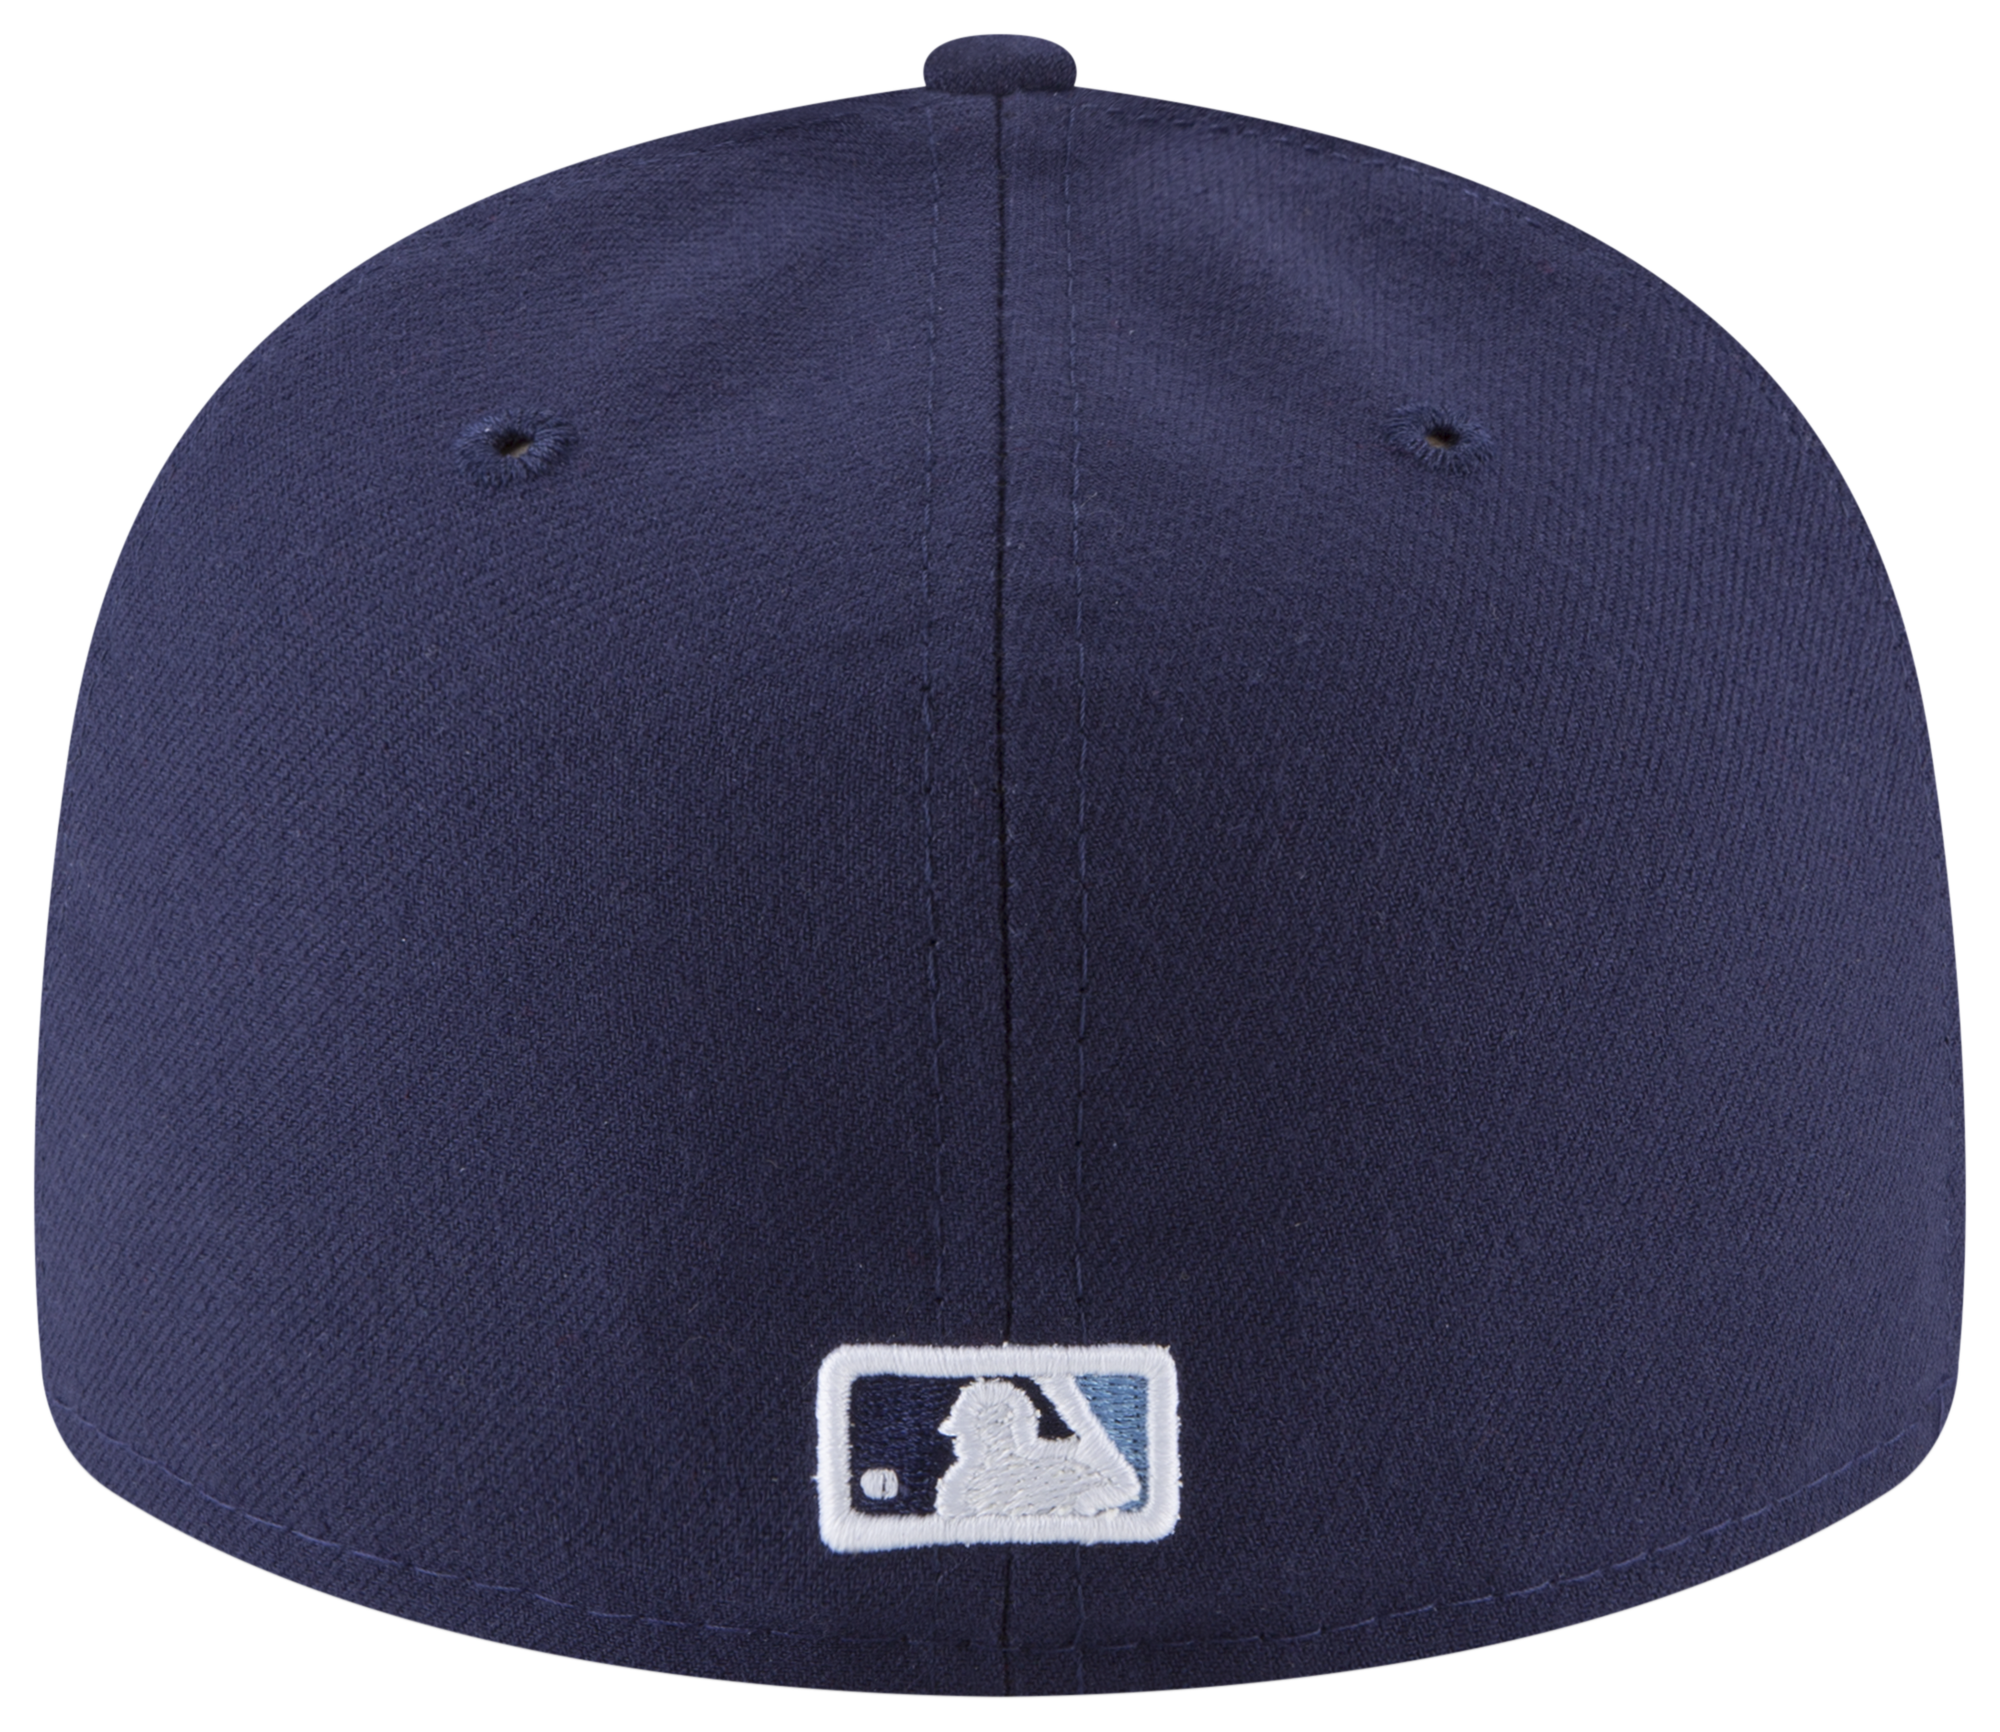 New Era Rays 59Fifty Authentic Collection Cap